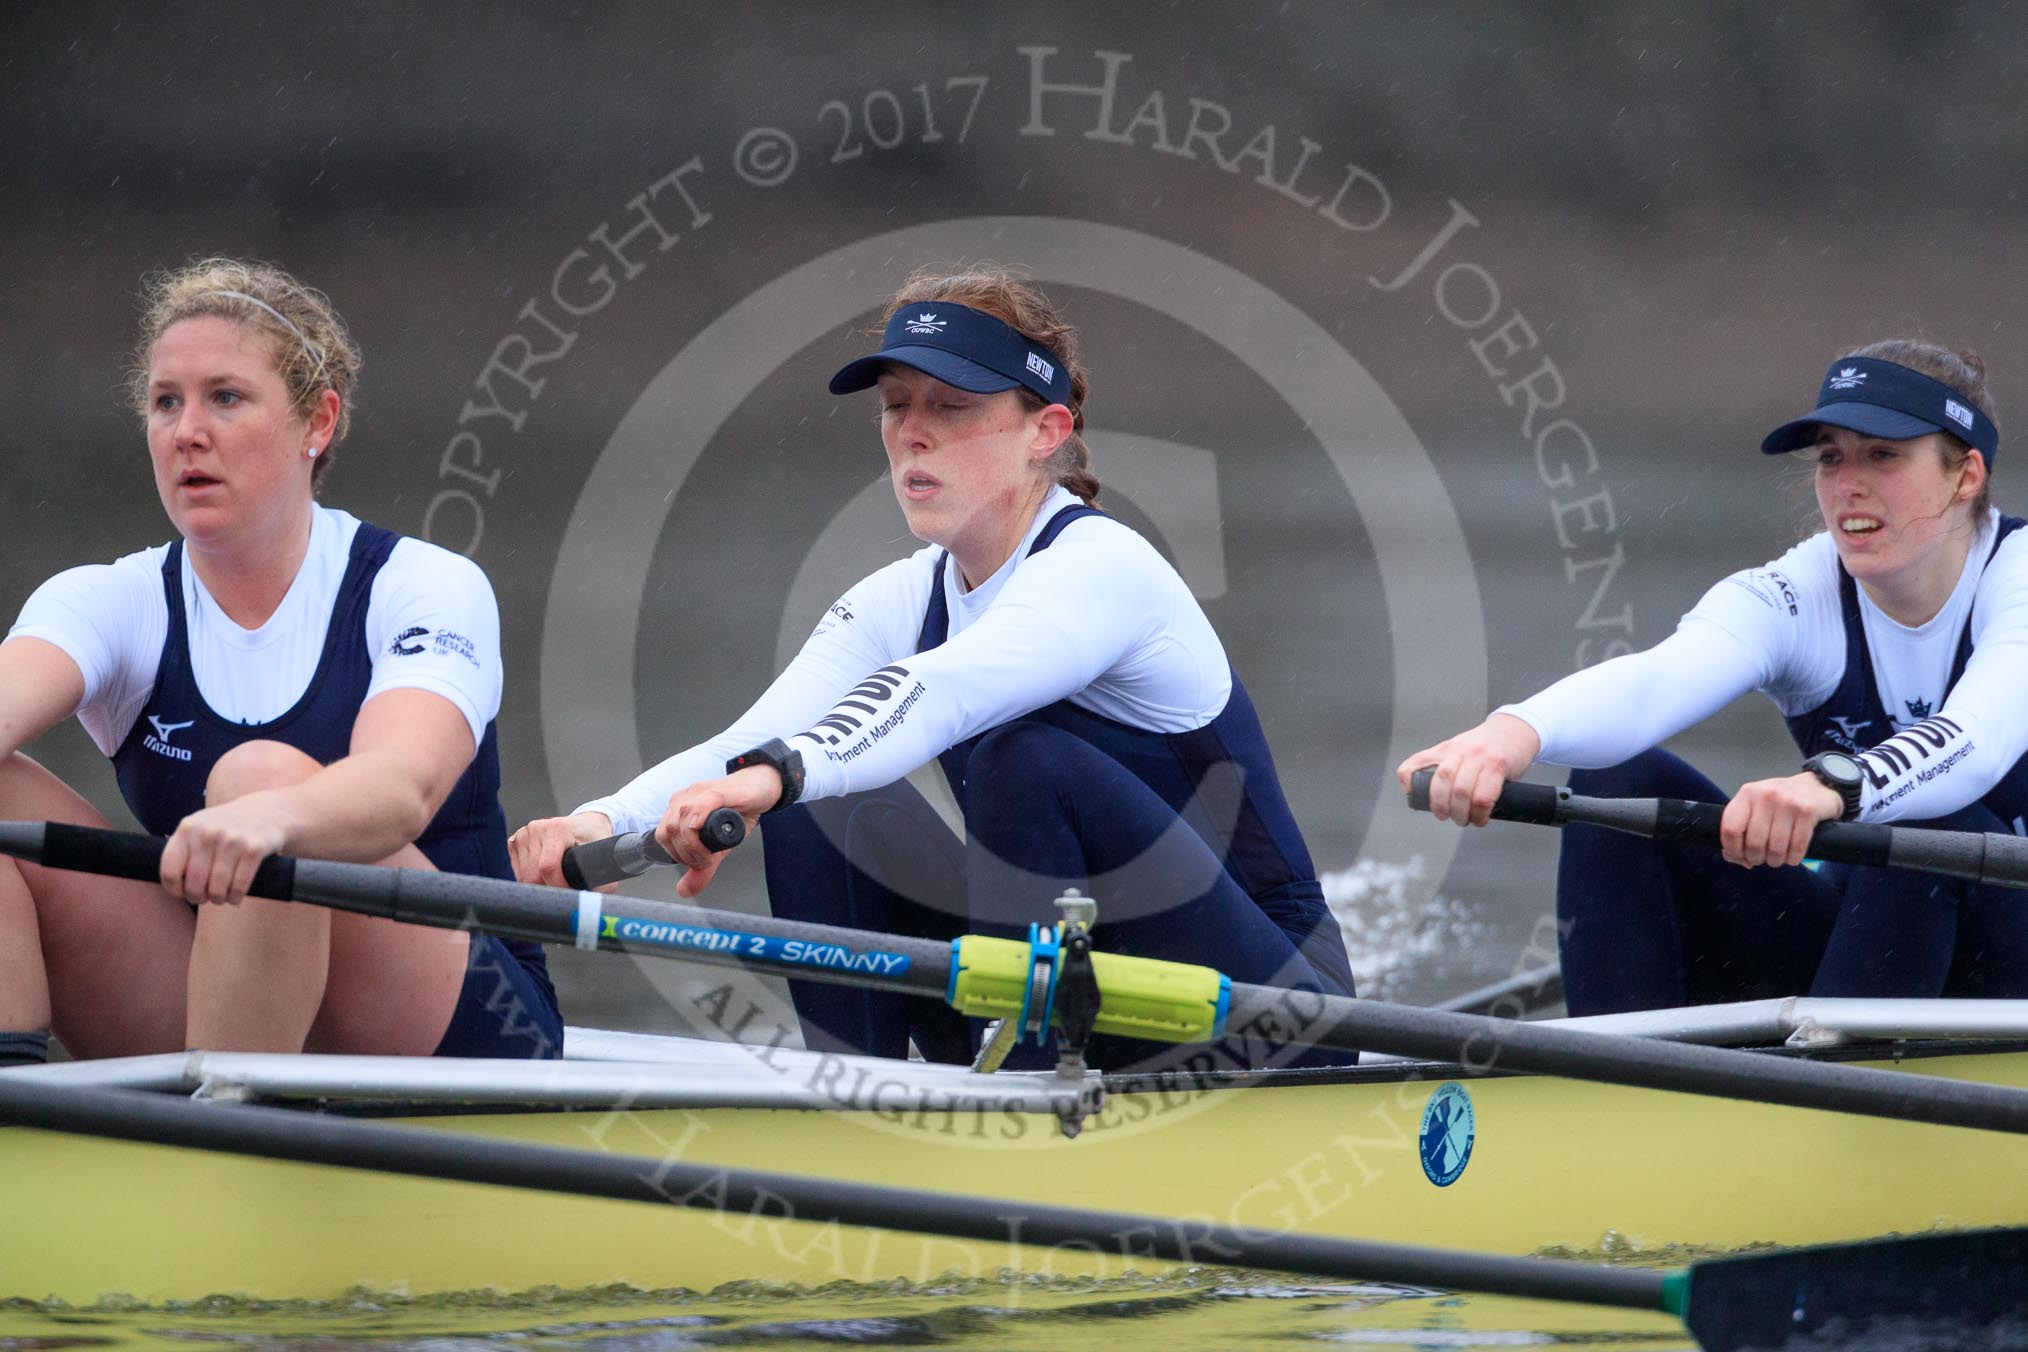 The Boat Race season 2018 - Women's Boat Race Trial Eights (OUWBC, Oxford): "Coursing River" - 5 Morgan McGovern, 4 Anna Murgatroyd, 3 Stefanie Zekoll.
River Thames between Putney Bridge and Mortlake,
London SW15,

United Kingdom,
on 21 January 2018 at 14:31, image #80